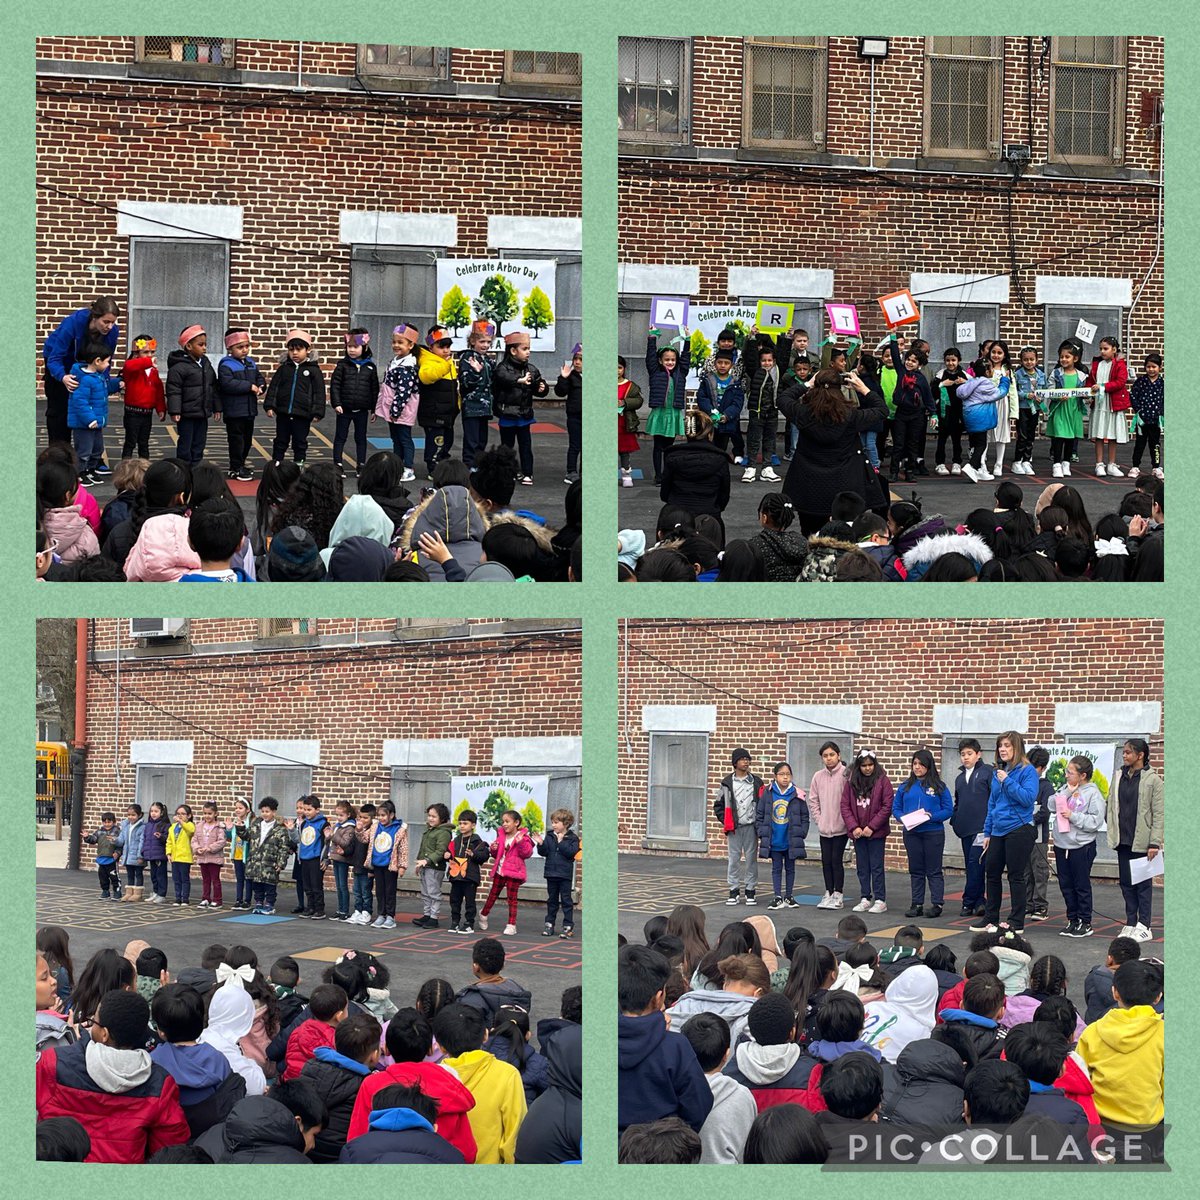 Our @PS66JKO knights did an amazing job at our Arbor Day celebration! We learned about the importance of planting trees & watched amazing performances! Thank you Mrs. Scala, Ms. Evangelista, Mrs. DiLiberto, Mrs. Cascardi & Ms. Lugo for all your hard work! @D27NYC @NYCSchools